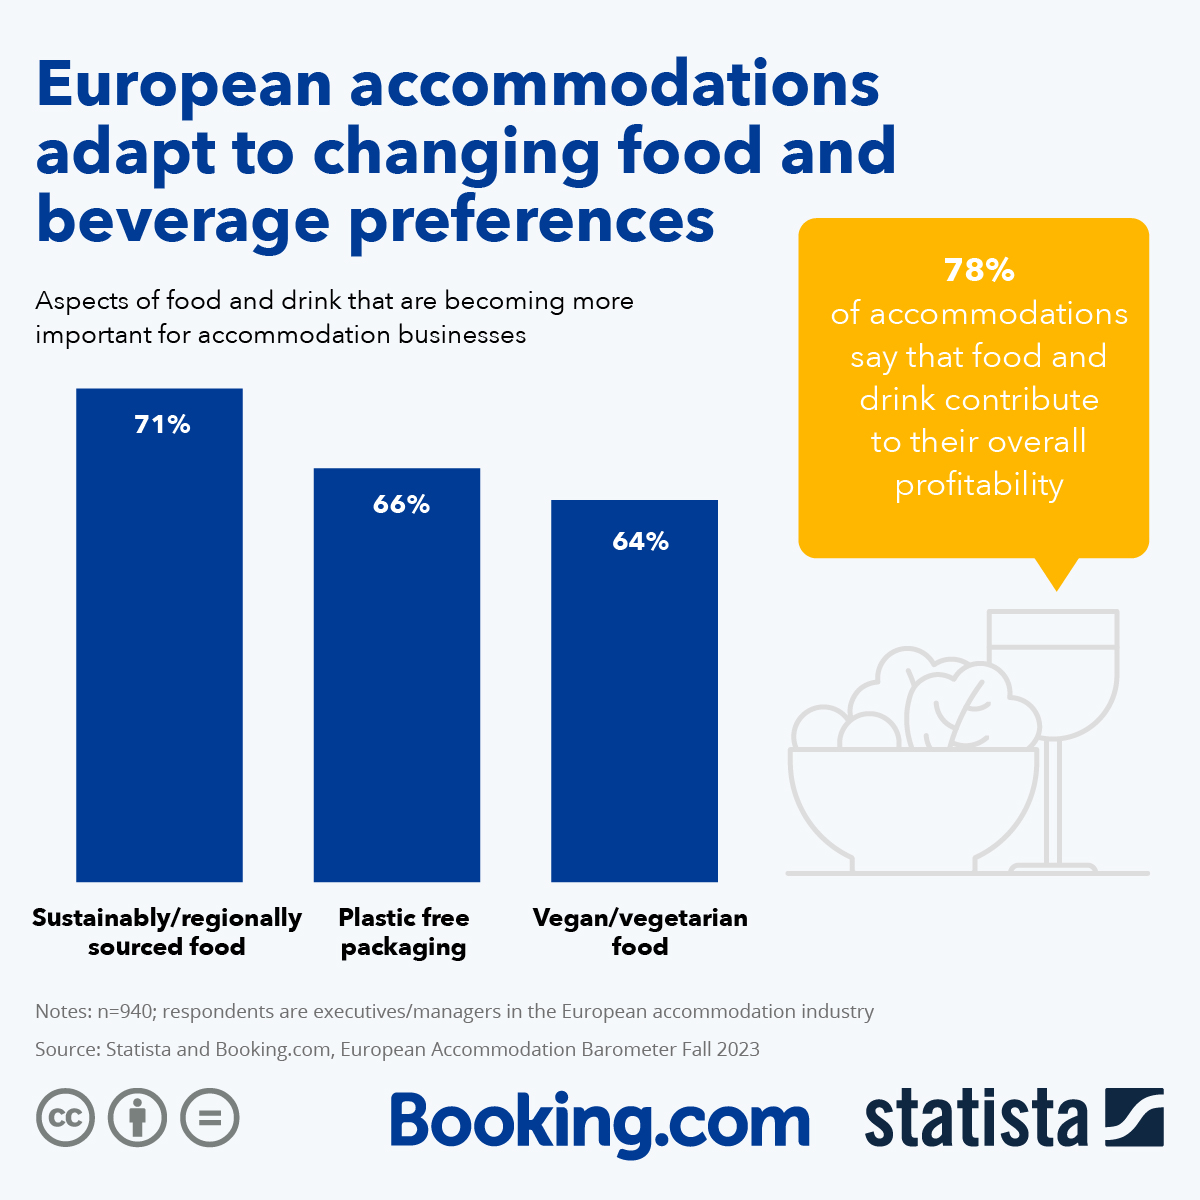 European Accommodations Adapt to Changing Food and Beverage Preferences #Europe #Accommodation #Food #Beverage #Booking.com #Statista